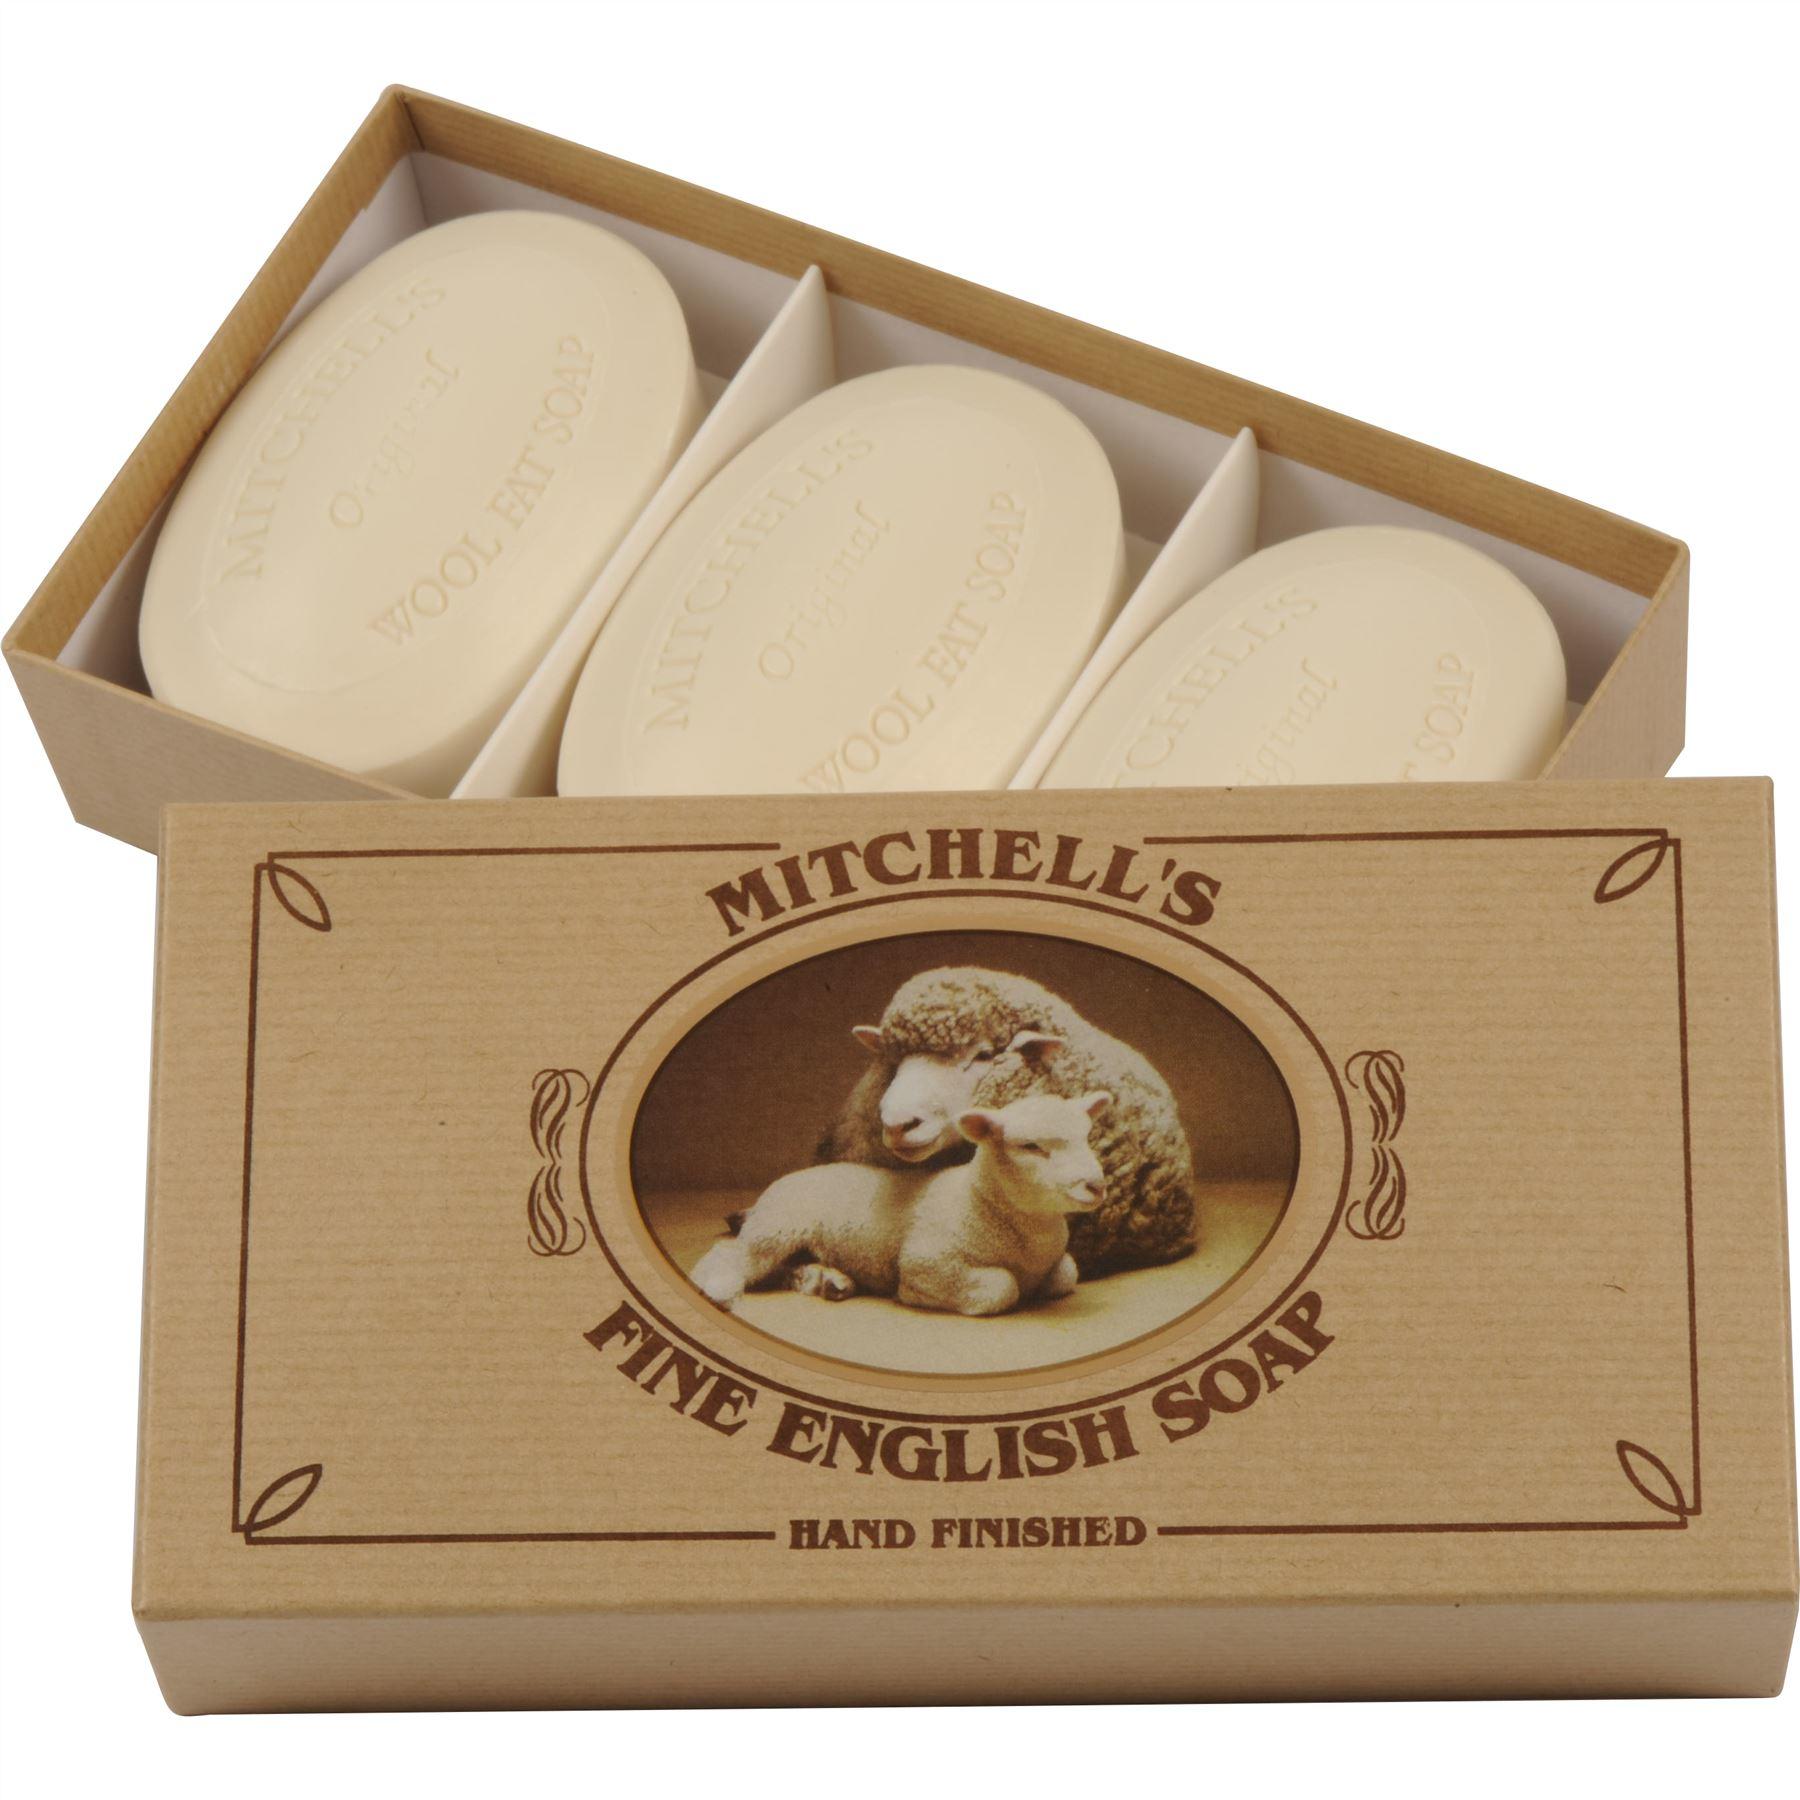 Mitchell's Wool Fat Lanolin Soap Bar Gift Set with Three